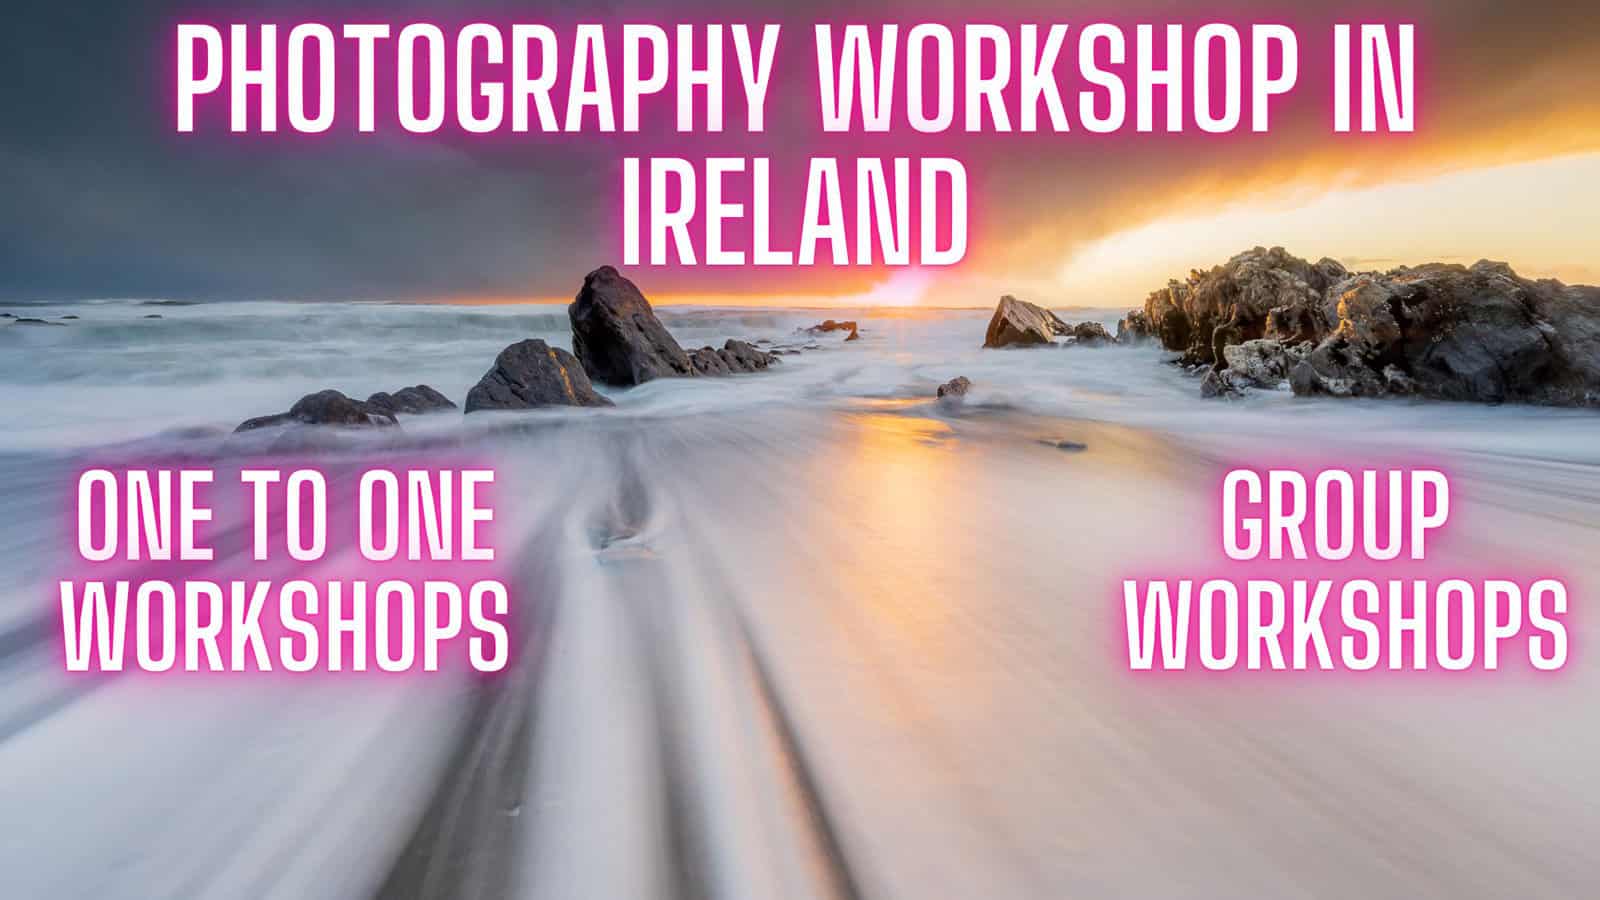 Photography workshops in Ireland